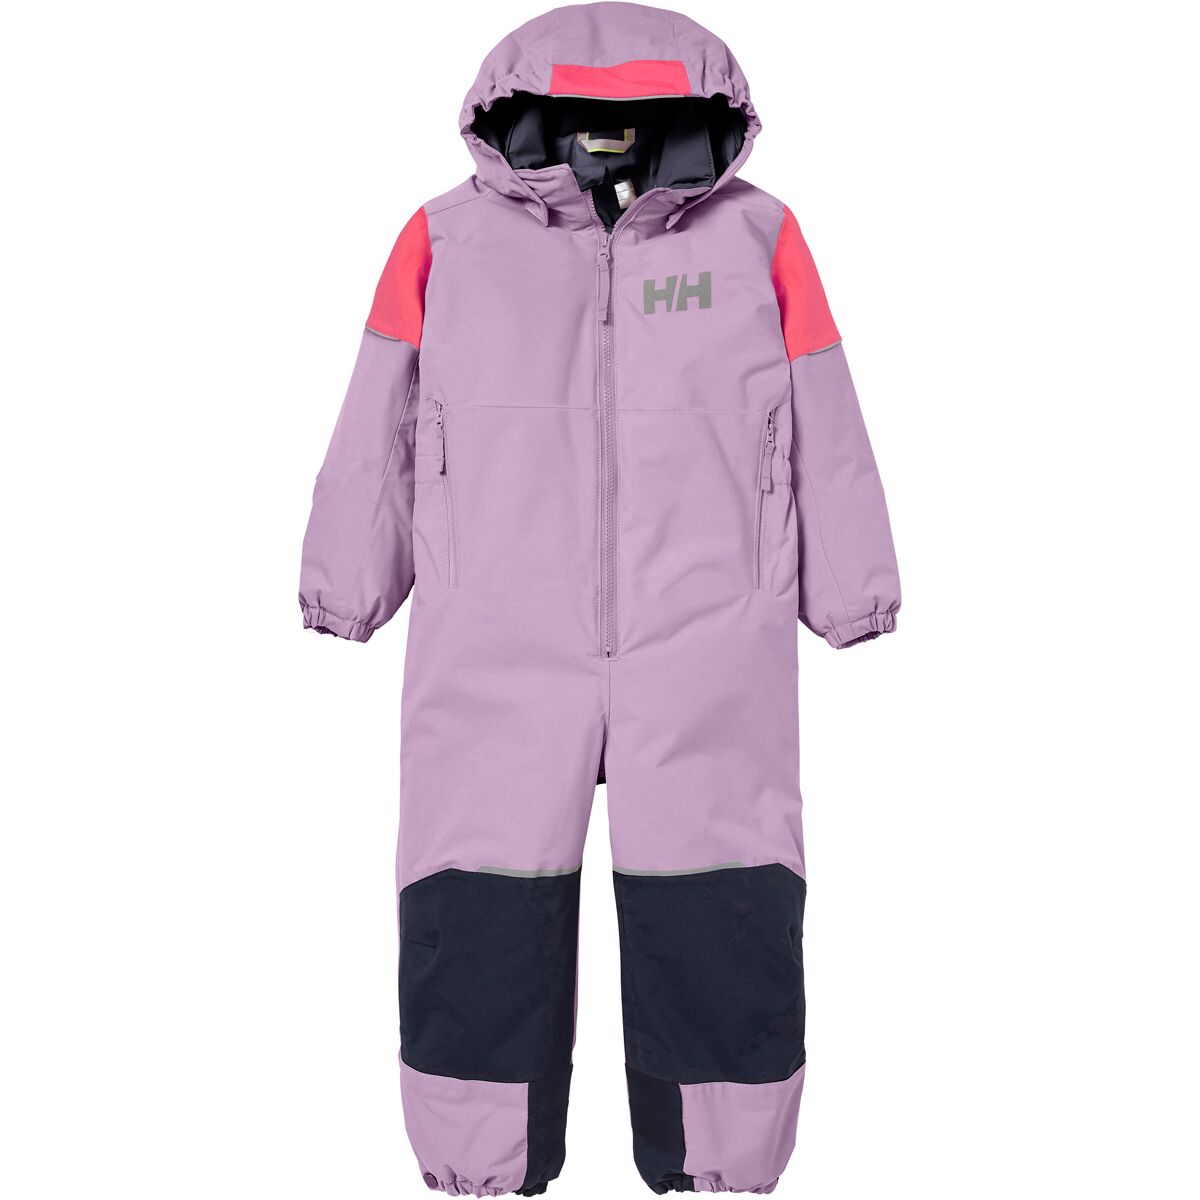 Helly Hansen Rider 2.0 Insulated Snow Suit - Toddlers'